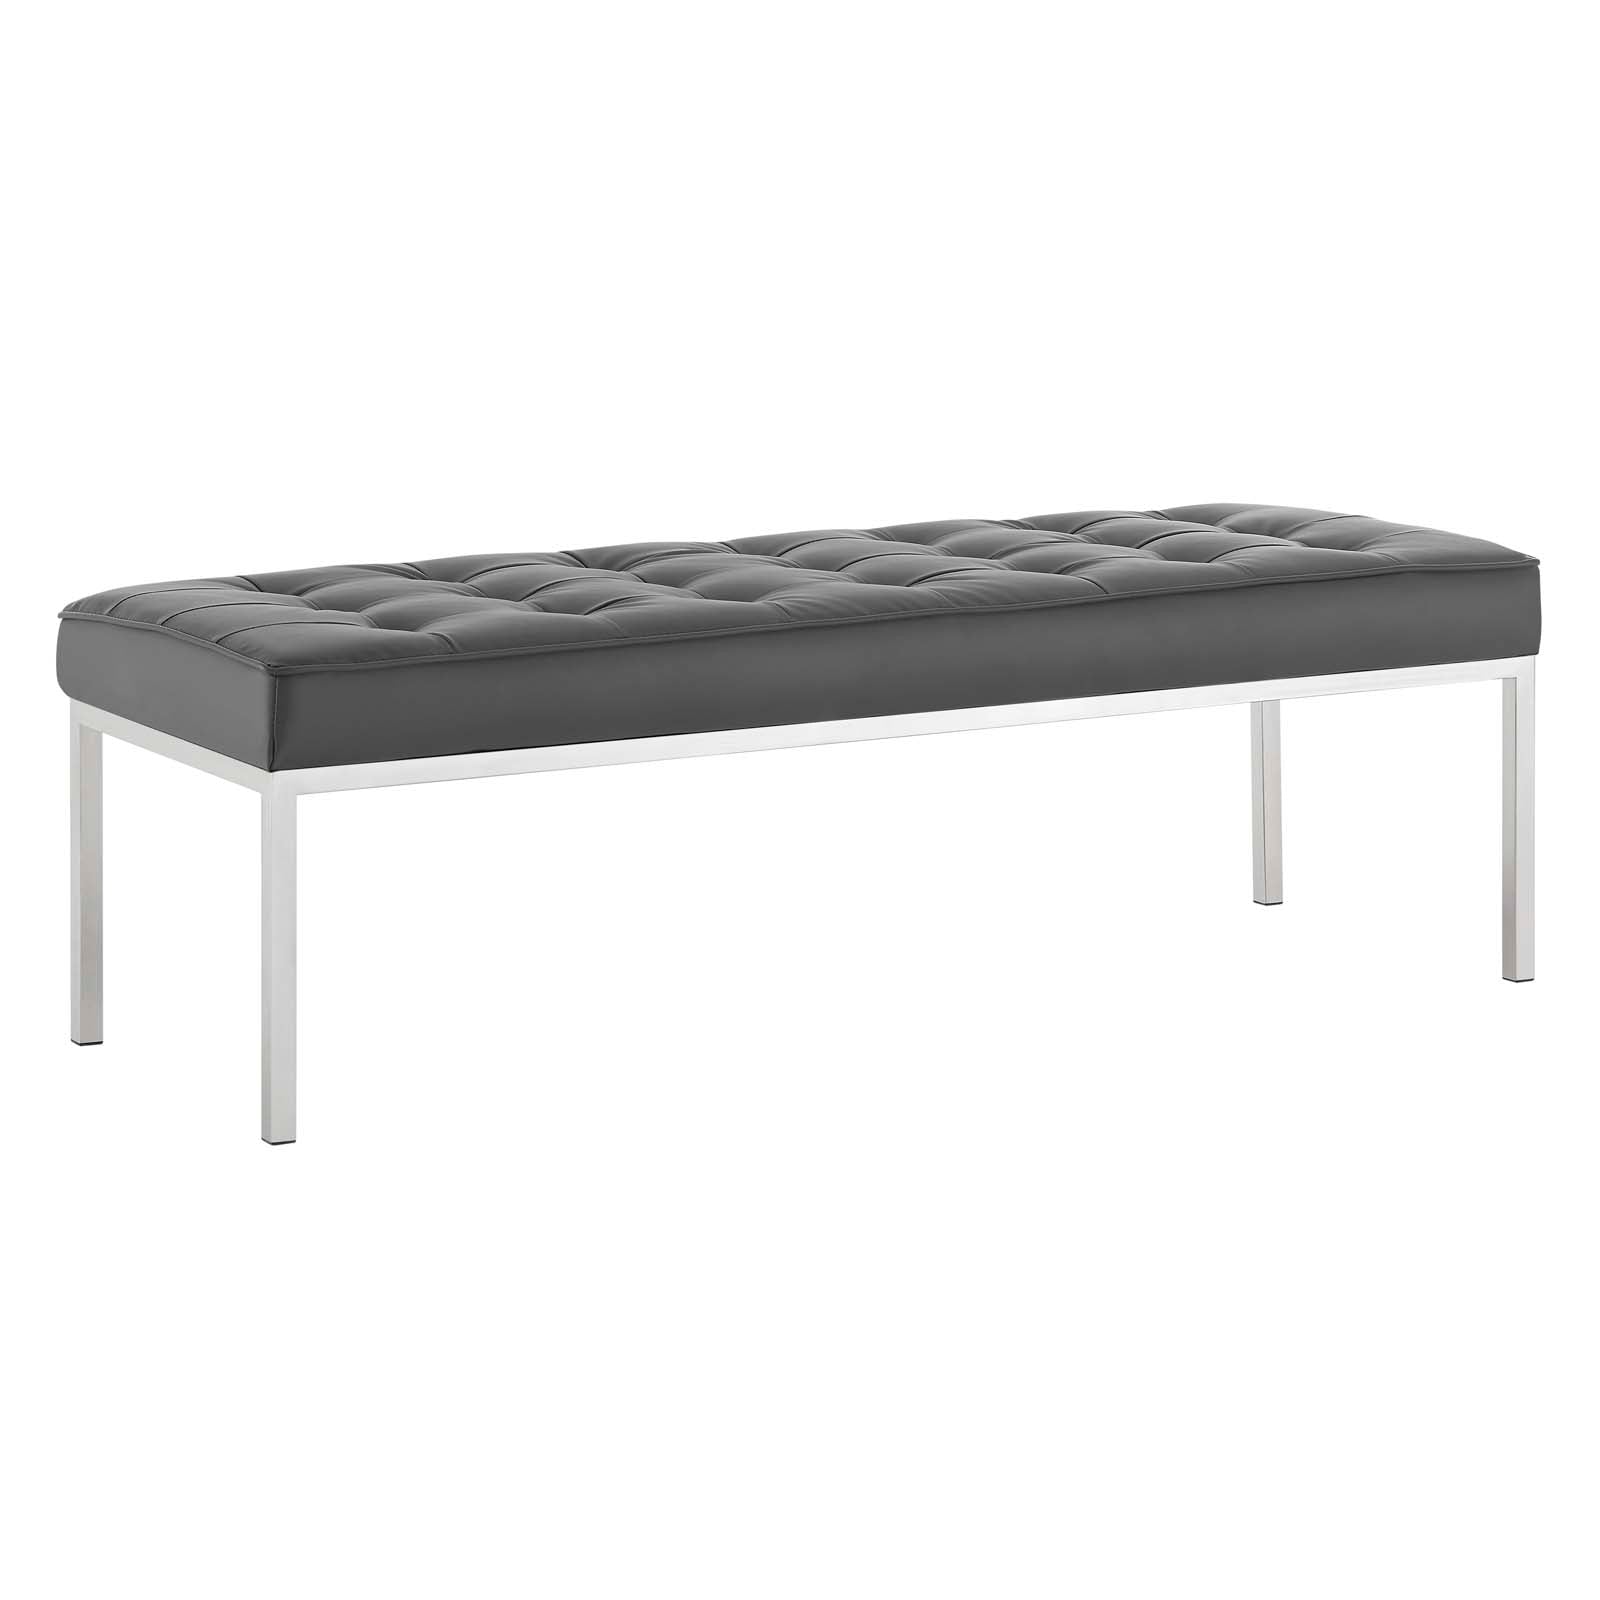 Loft Tufted Large Upholstered Faux Leather Bench - East Shore Modern Home Furnishings